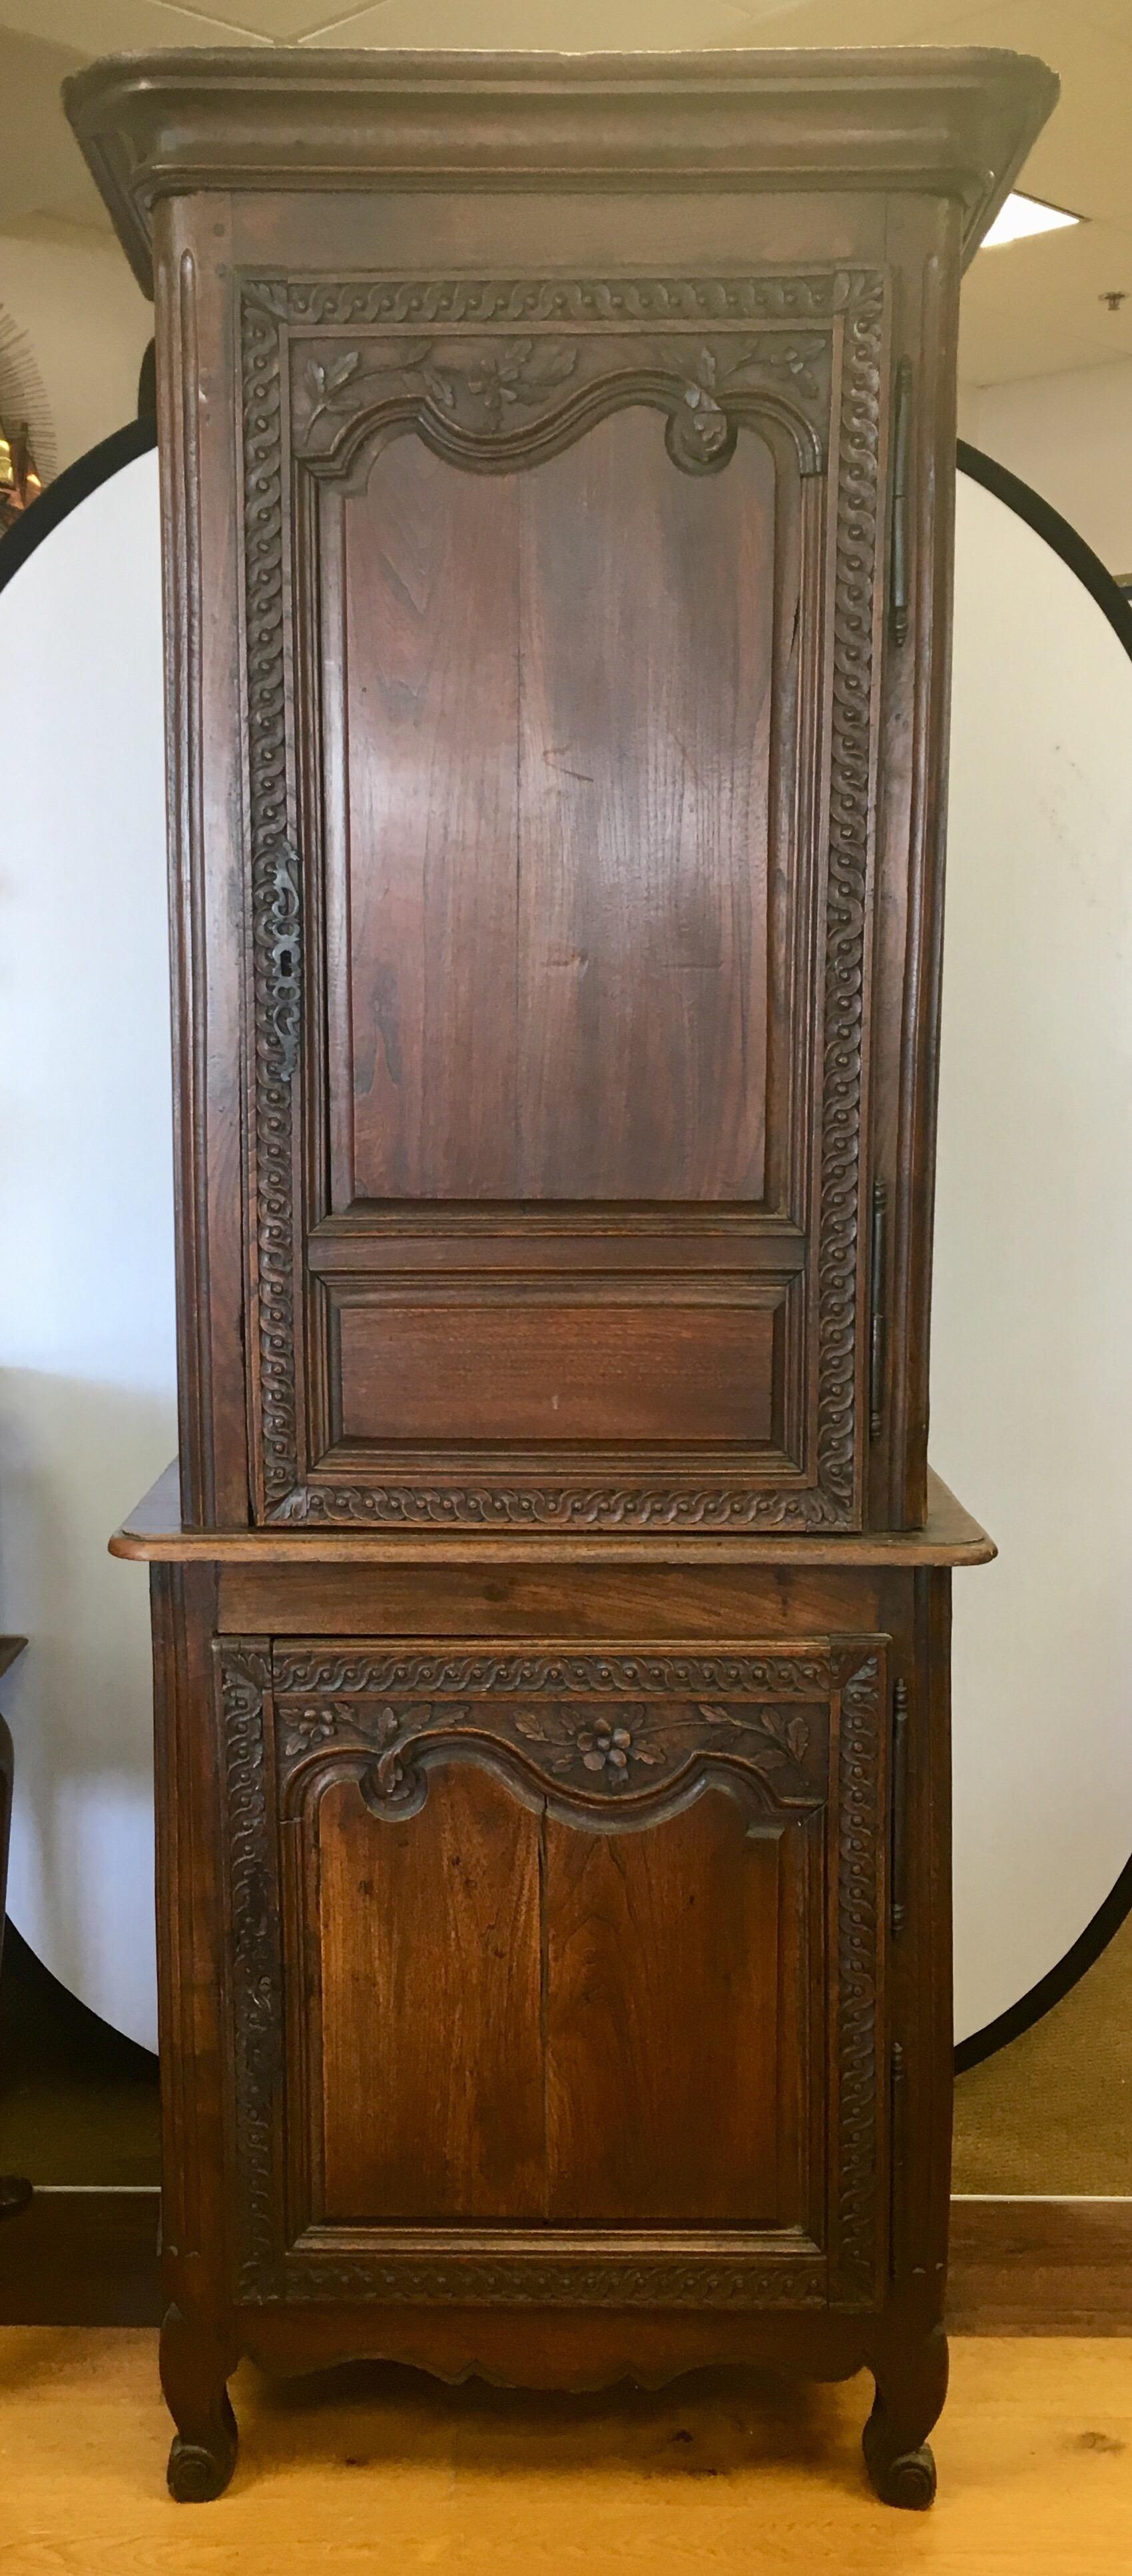 Exceptional carved French cabinet armoire early 19th century wardrobe.
 